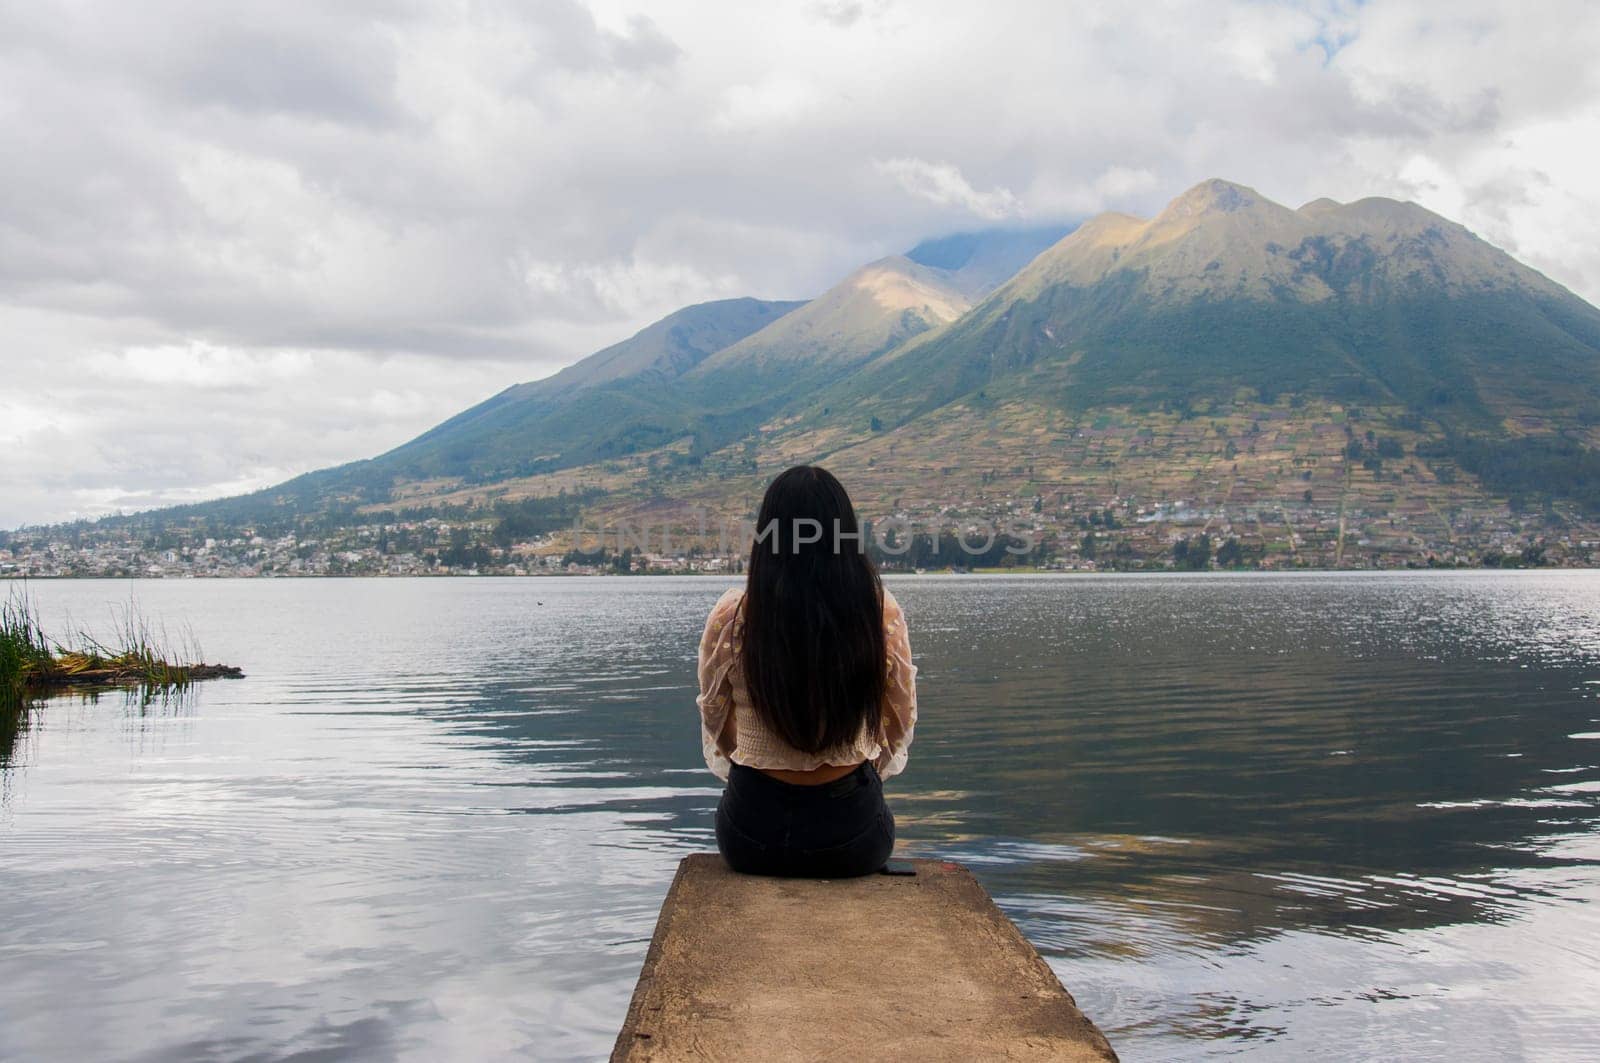 young latina with long hair with her back to the camera at the edge of a lake having a moment of calm, peace and relaxation looking at a dormant volcano in front of her. by Raulmartin